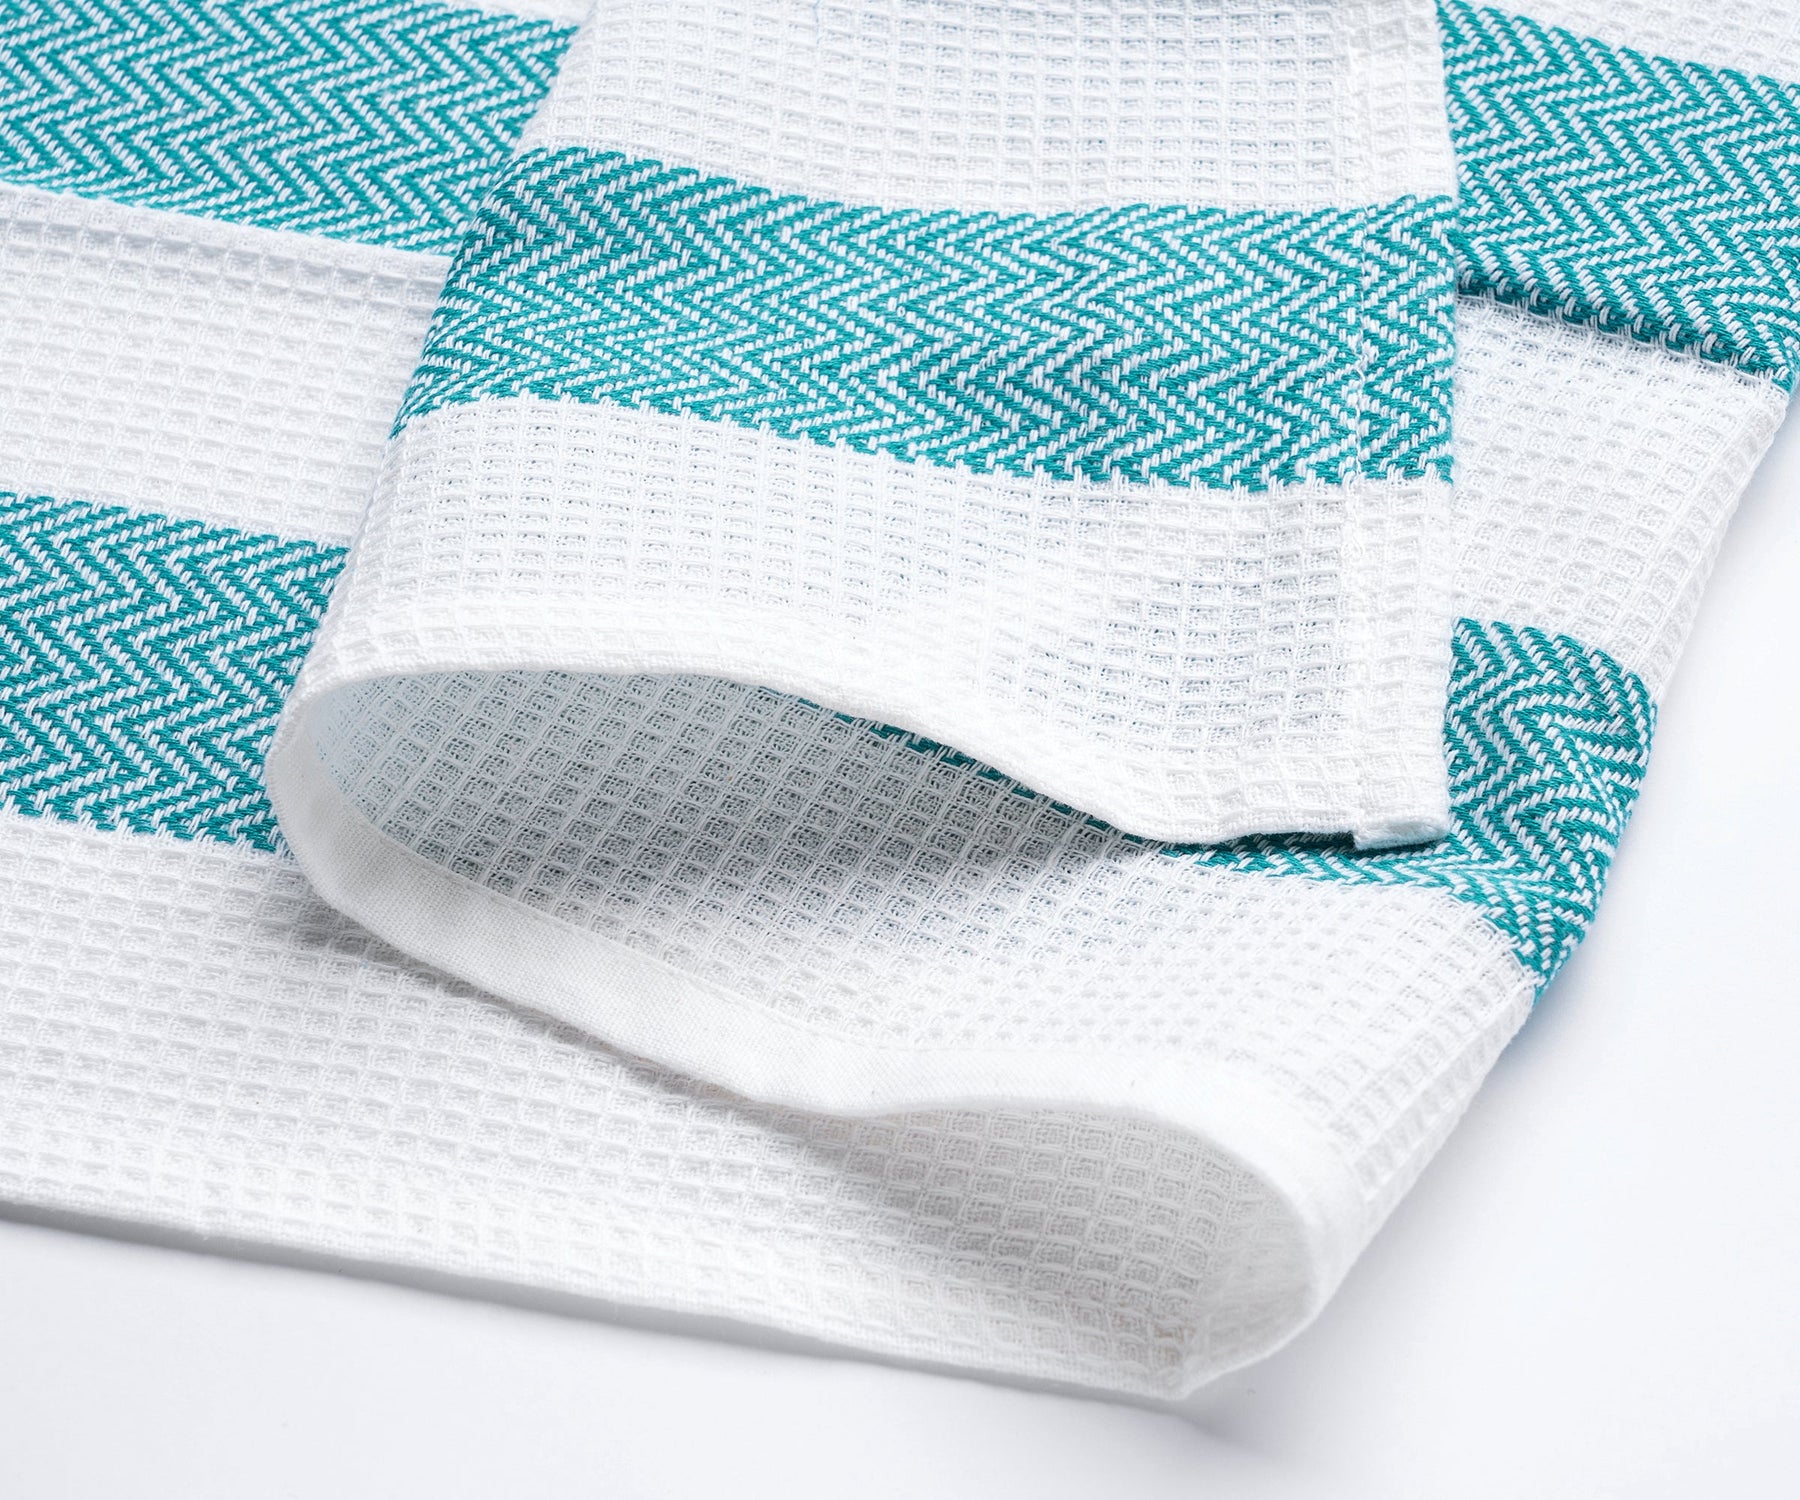 Luxury towels with striped patterns, offering comfort and style.